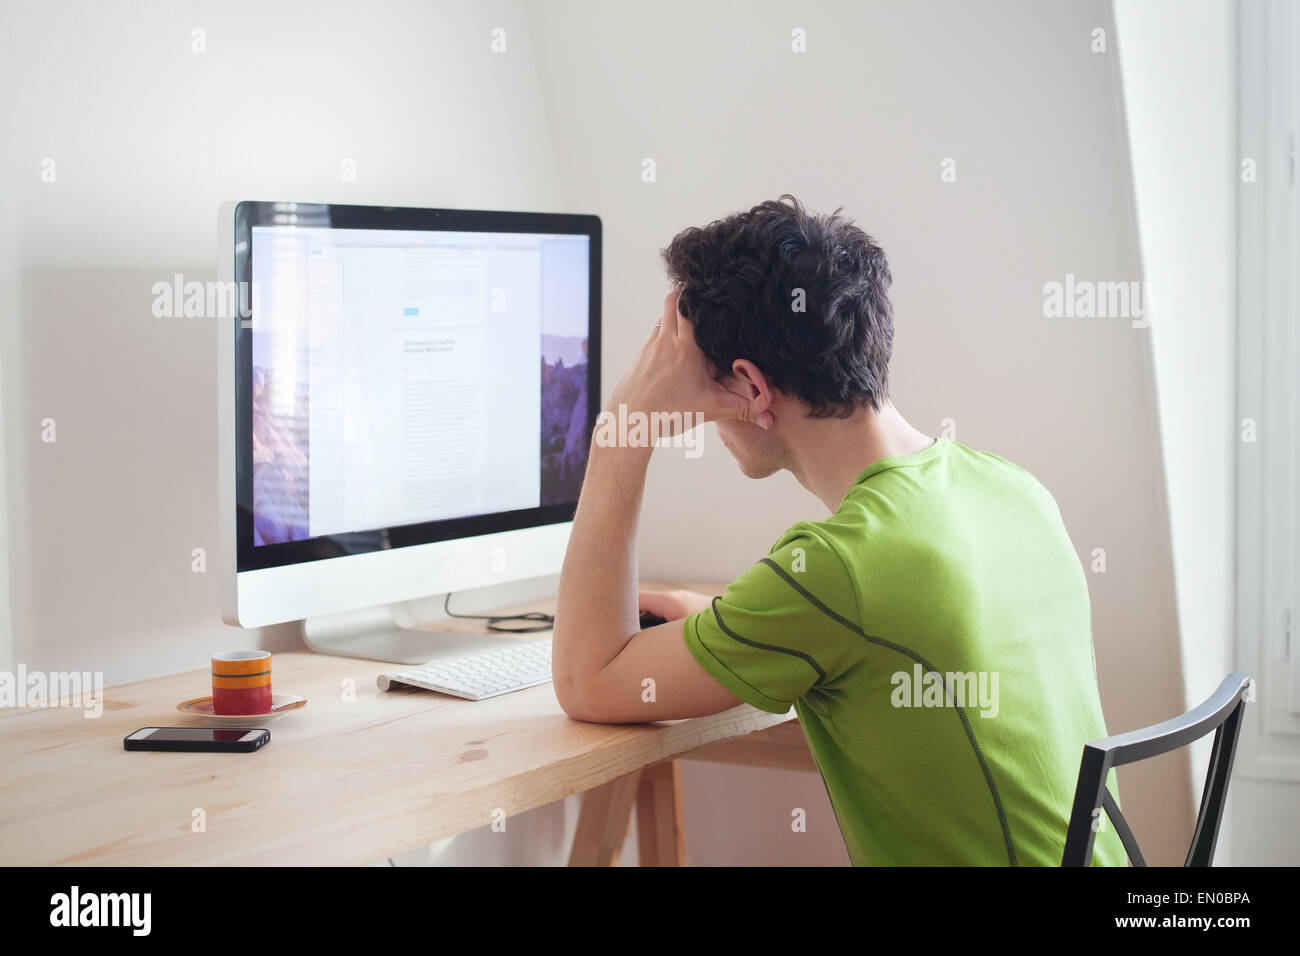 young man looking at the screen of computer at home interior Stock Photo